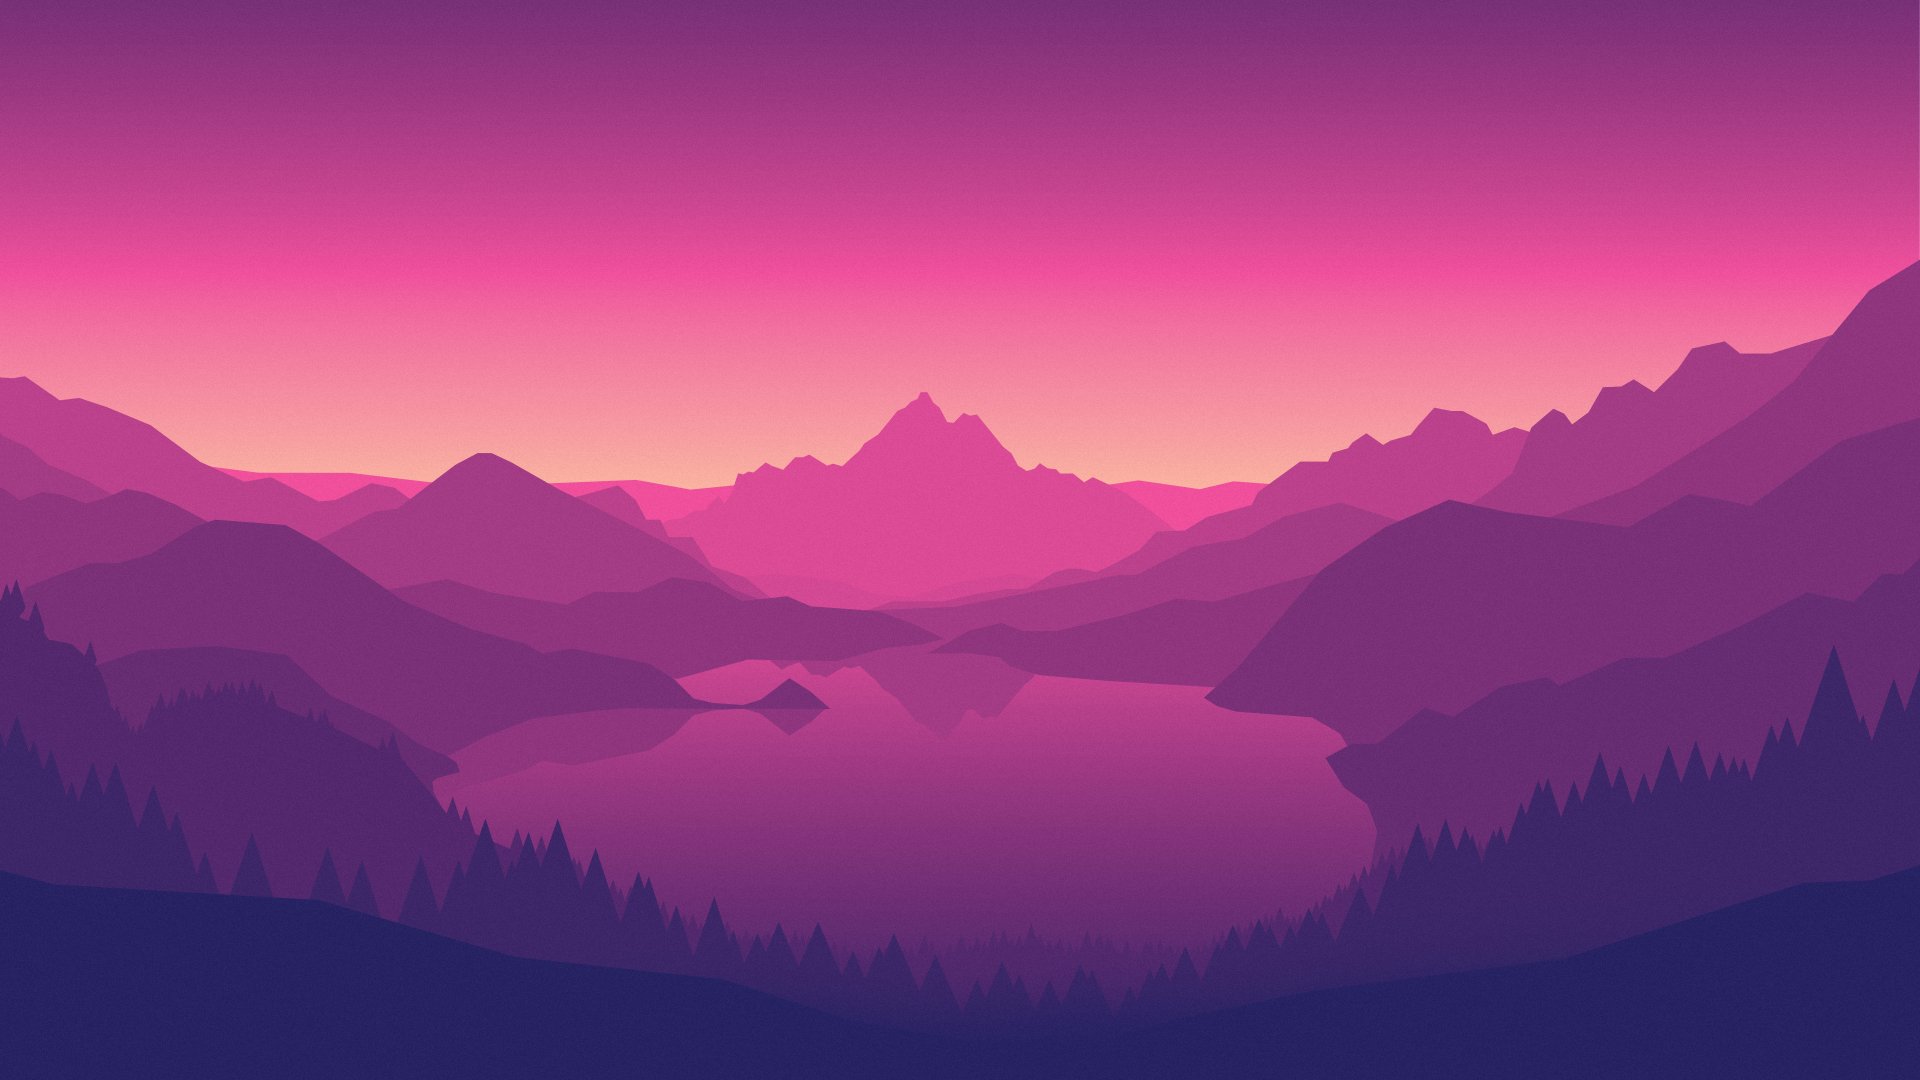 This desktop wallpaper I've been using for years and only now realized it has the bi flag colors